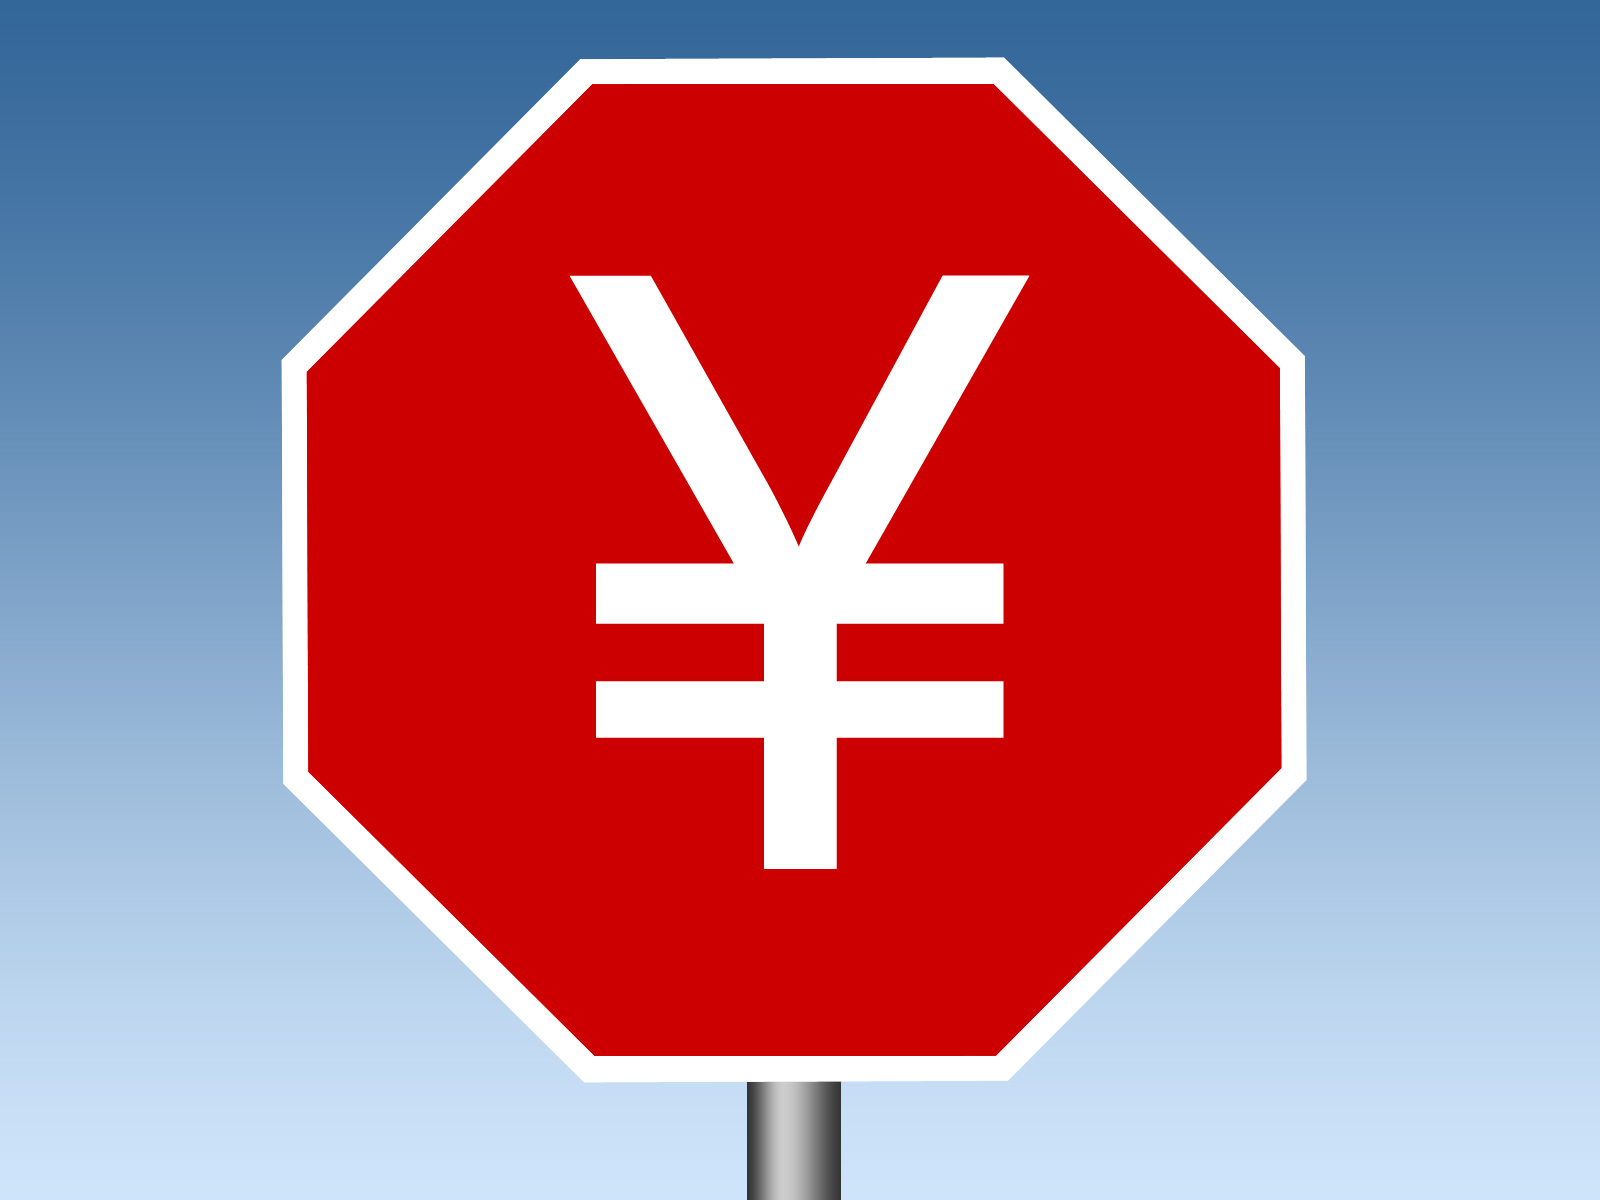 Yen sign on a traffic stop